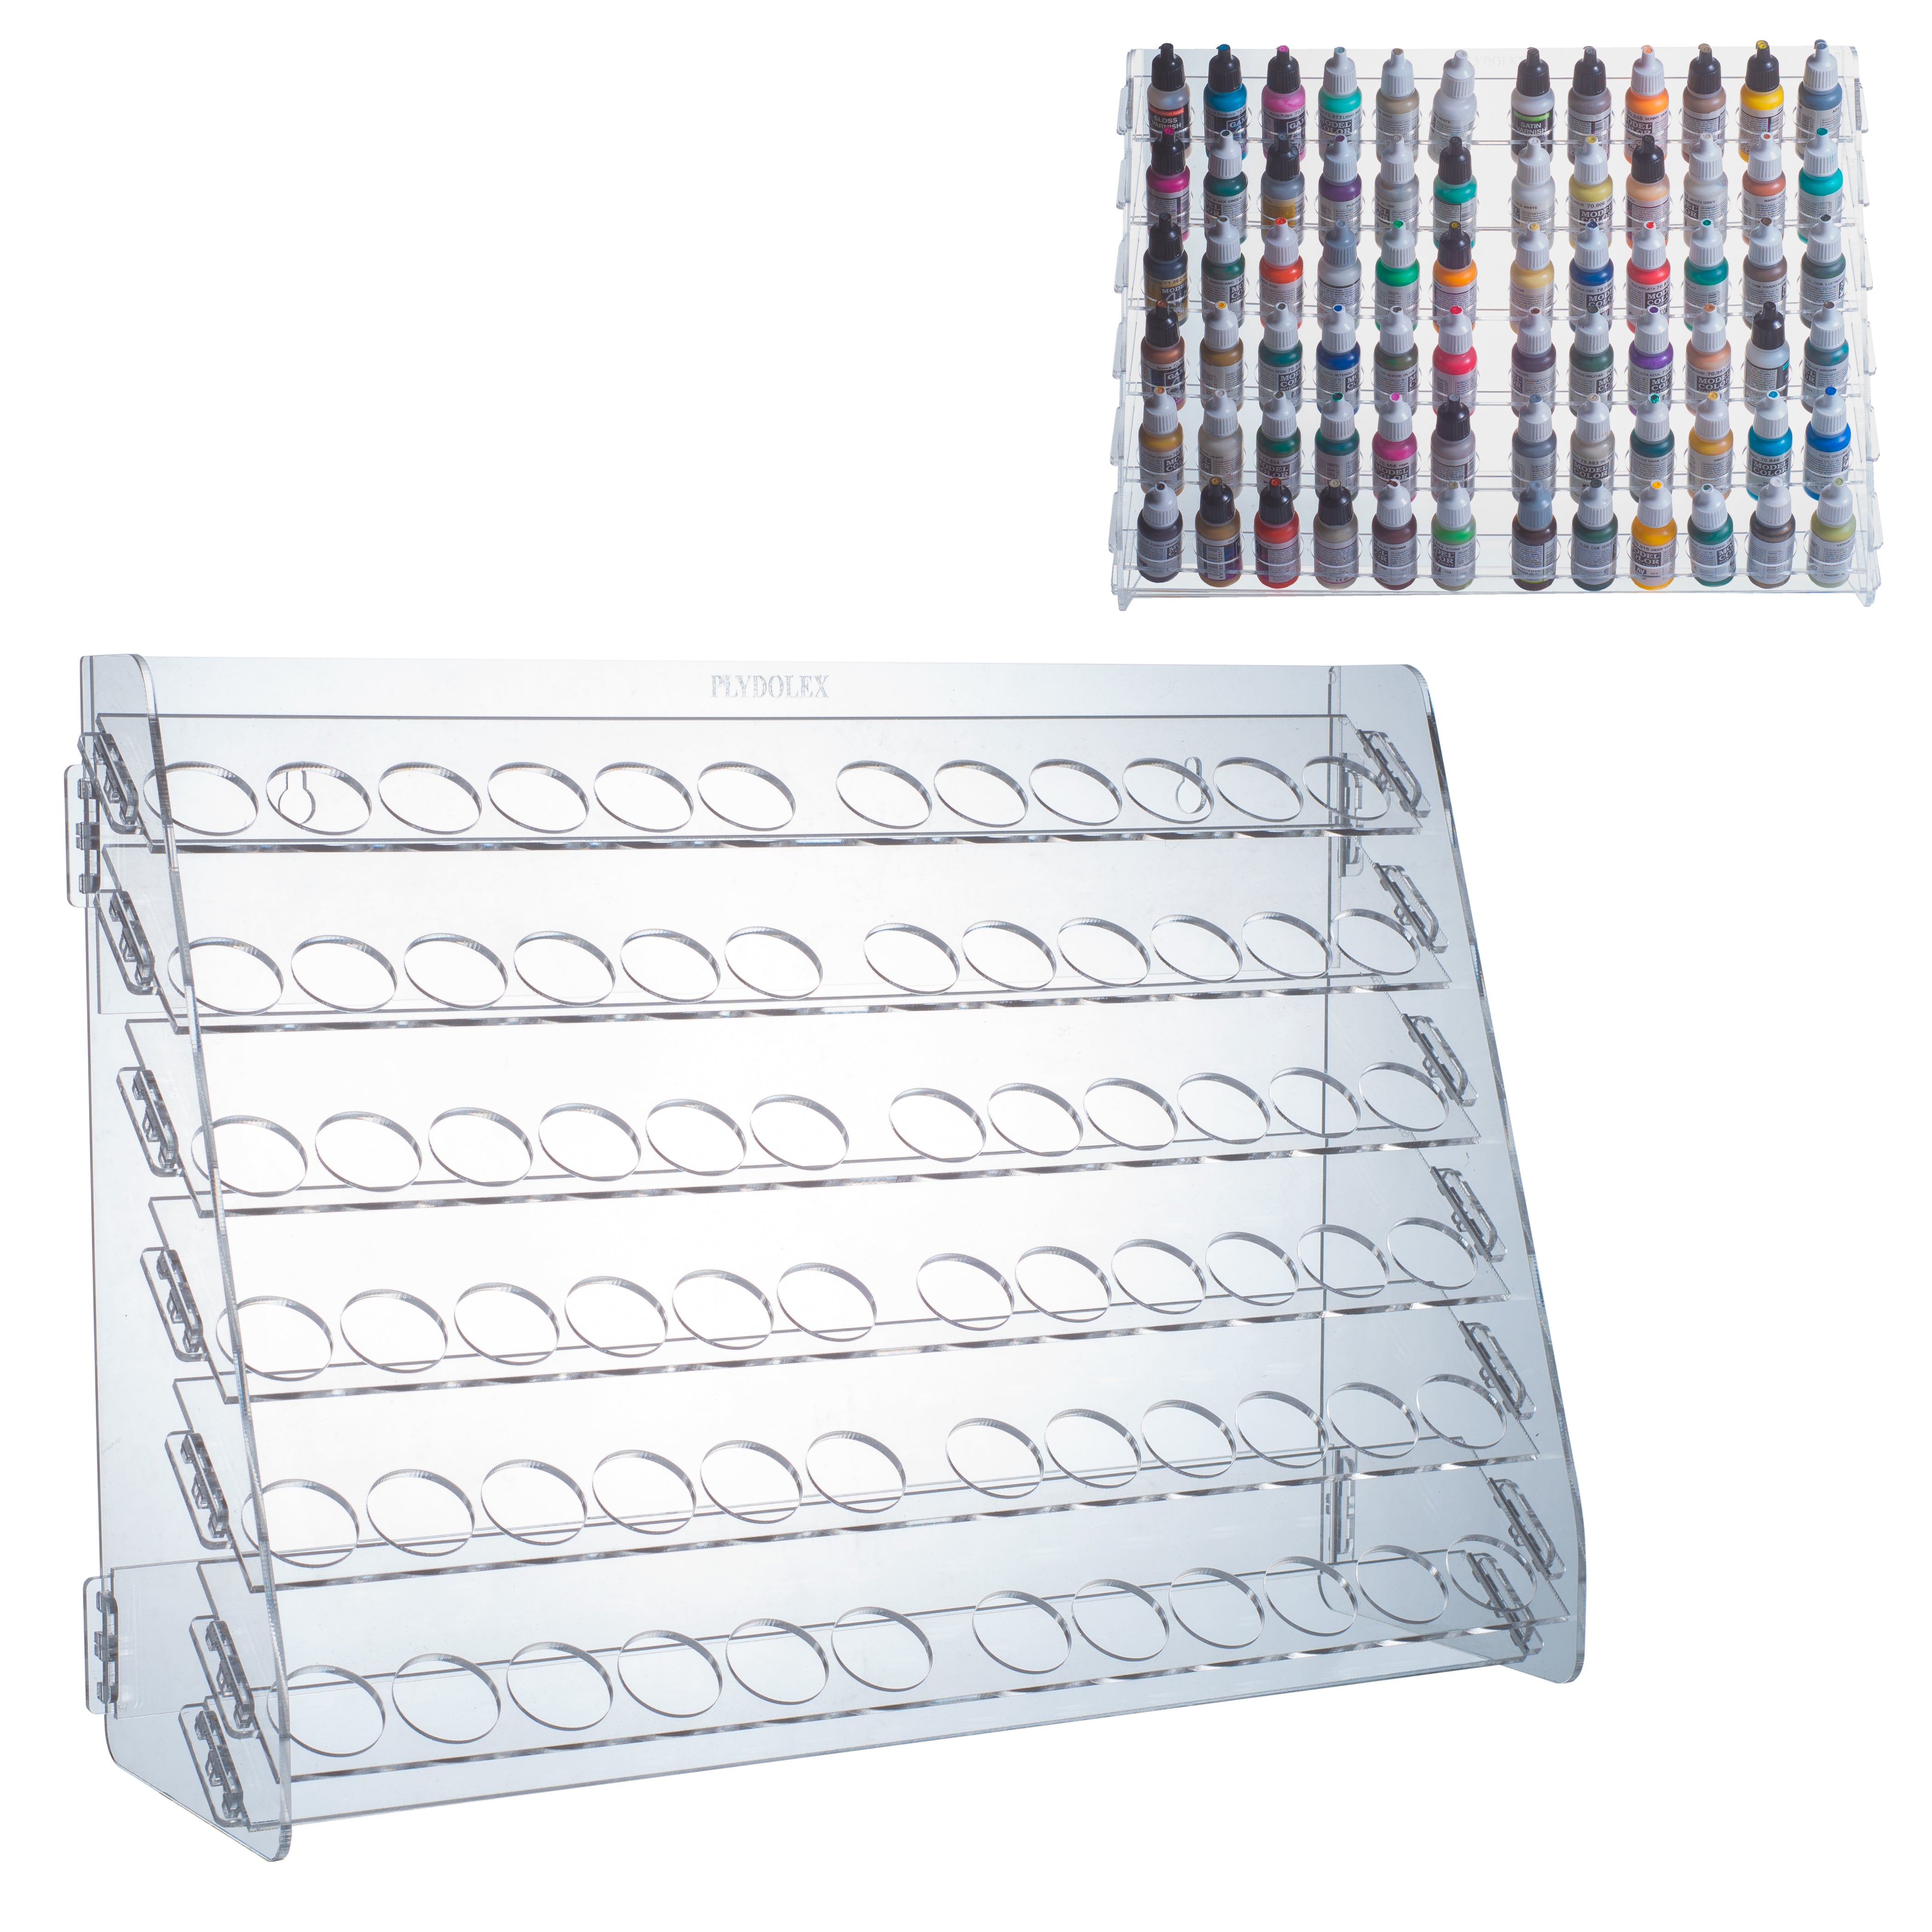 Plydolex Wooden Craft Paint Storage Rack with 58 Holes for Paint Bottles - Hand Craft Paint Holder Rack with 4 Miniature Stands and Removable Upper